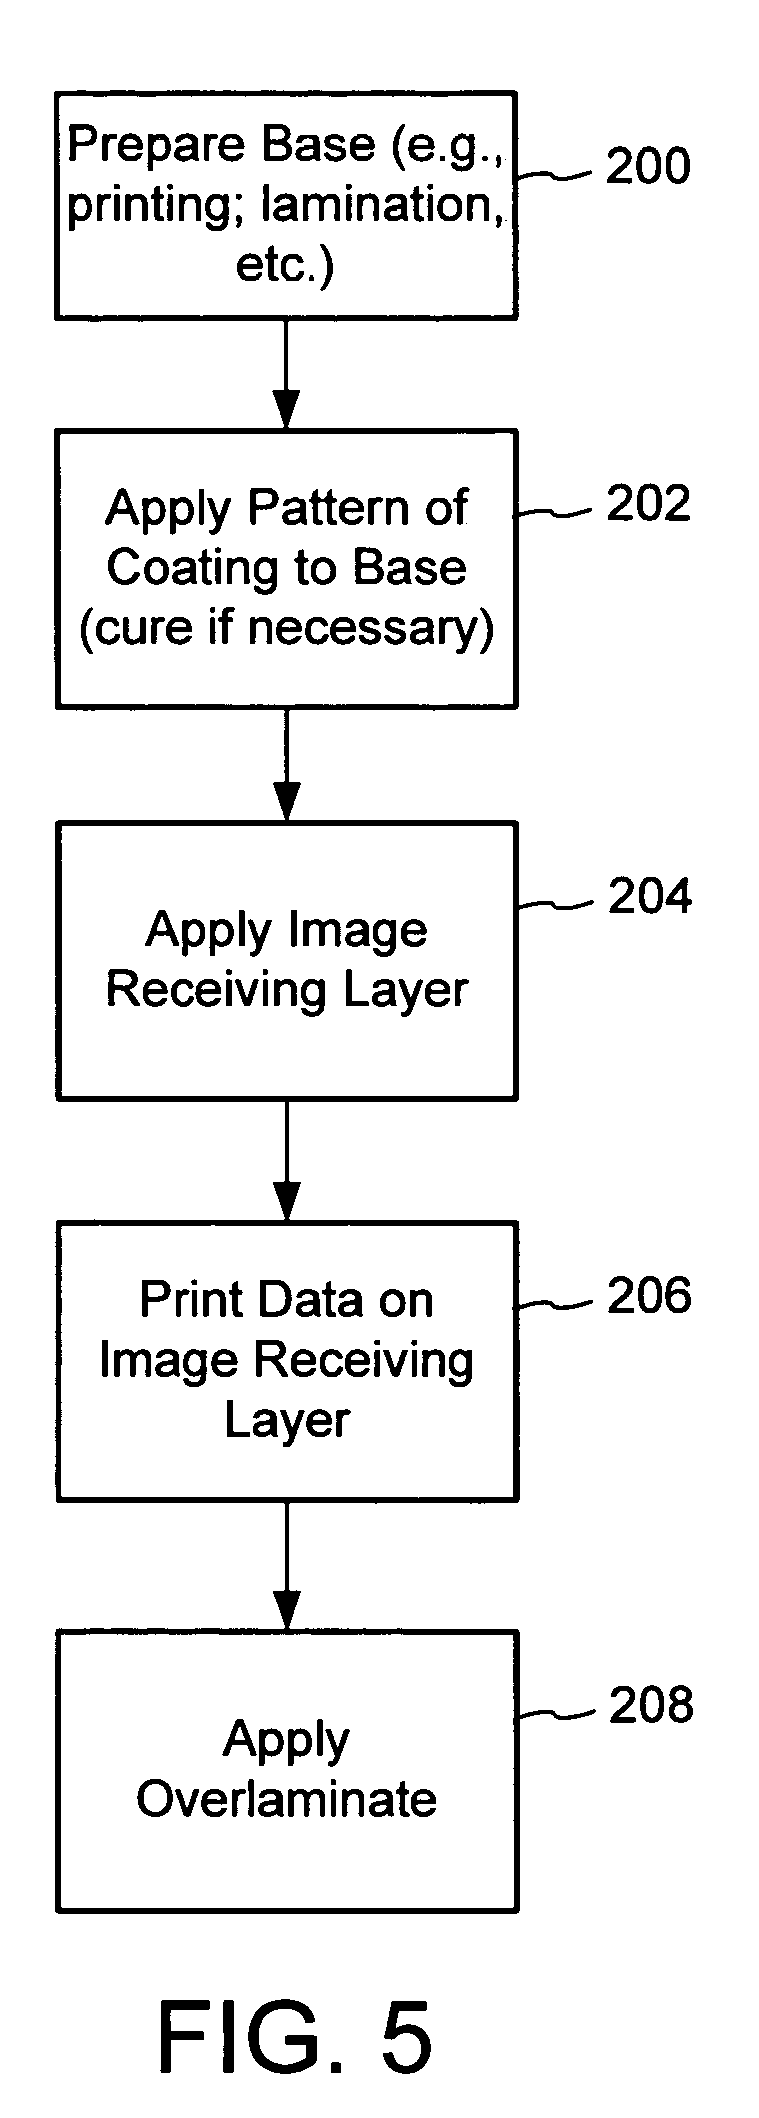 Image destruct feature used with image receiving layers in secure documents